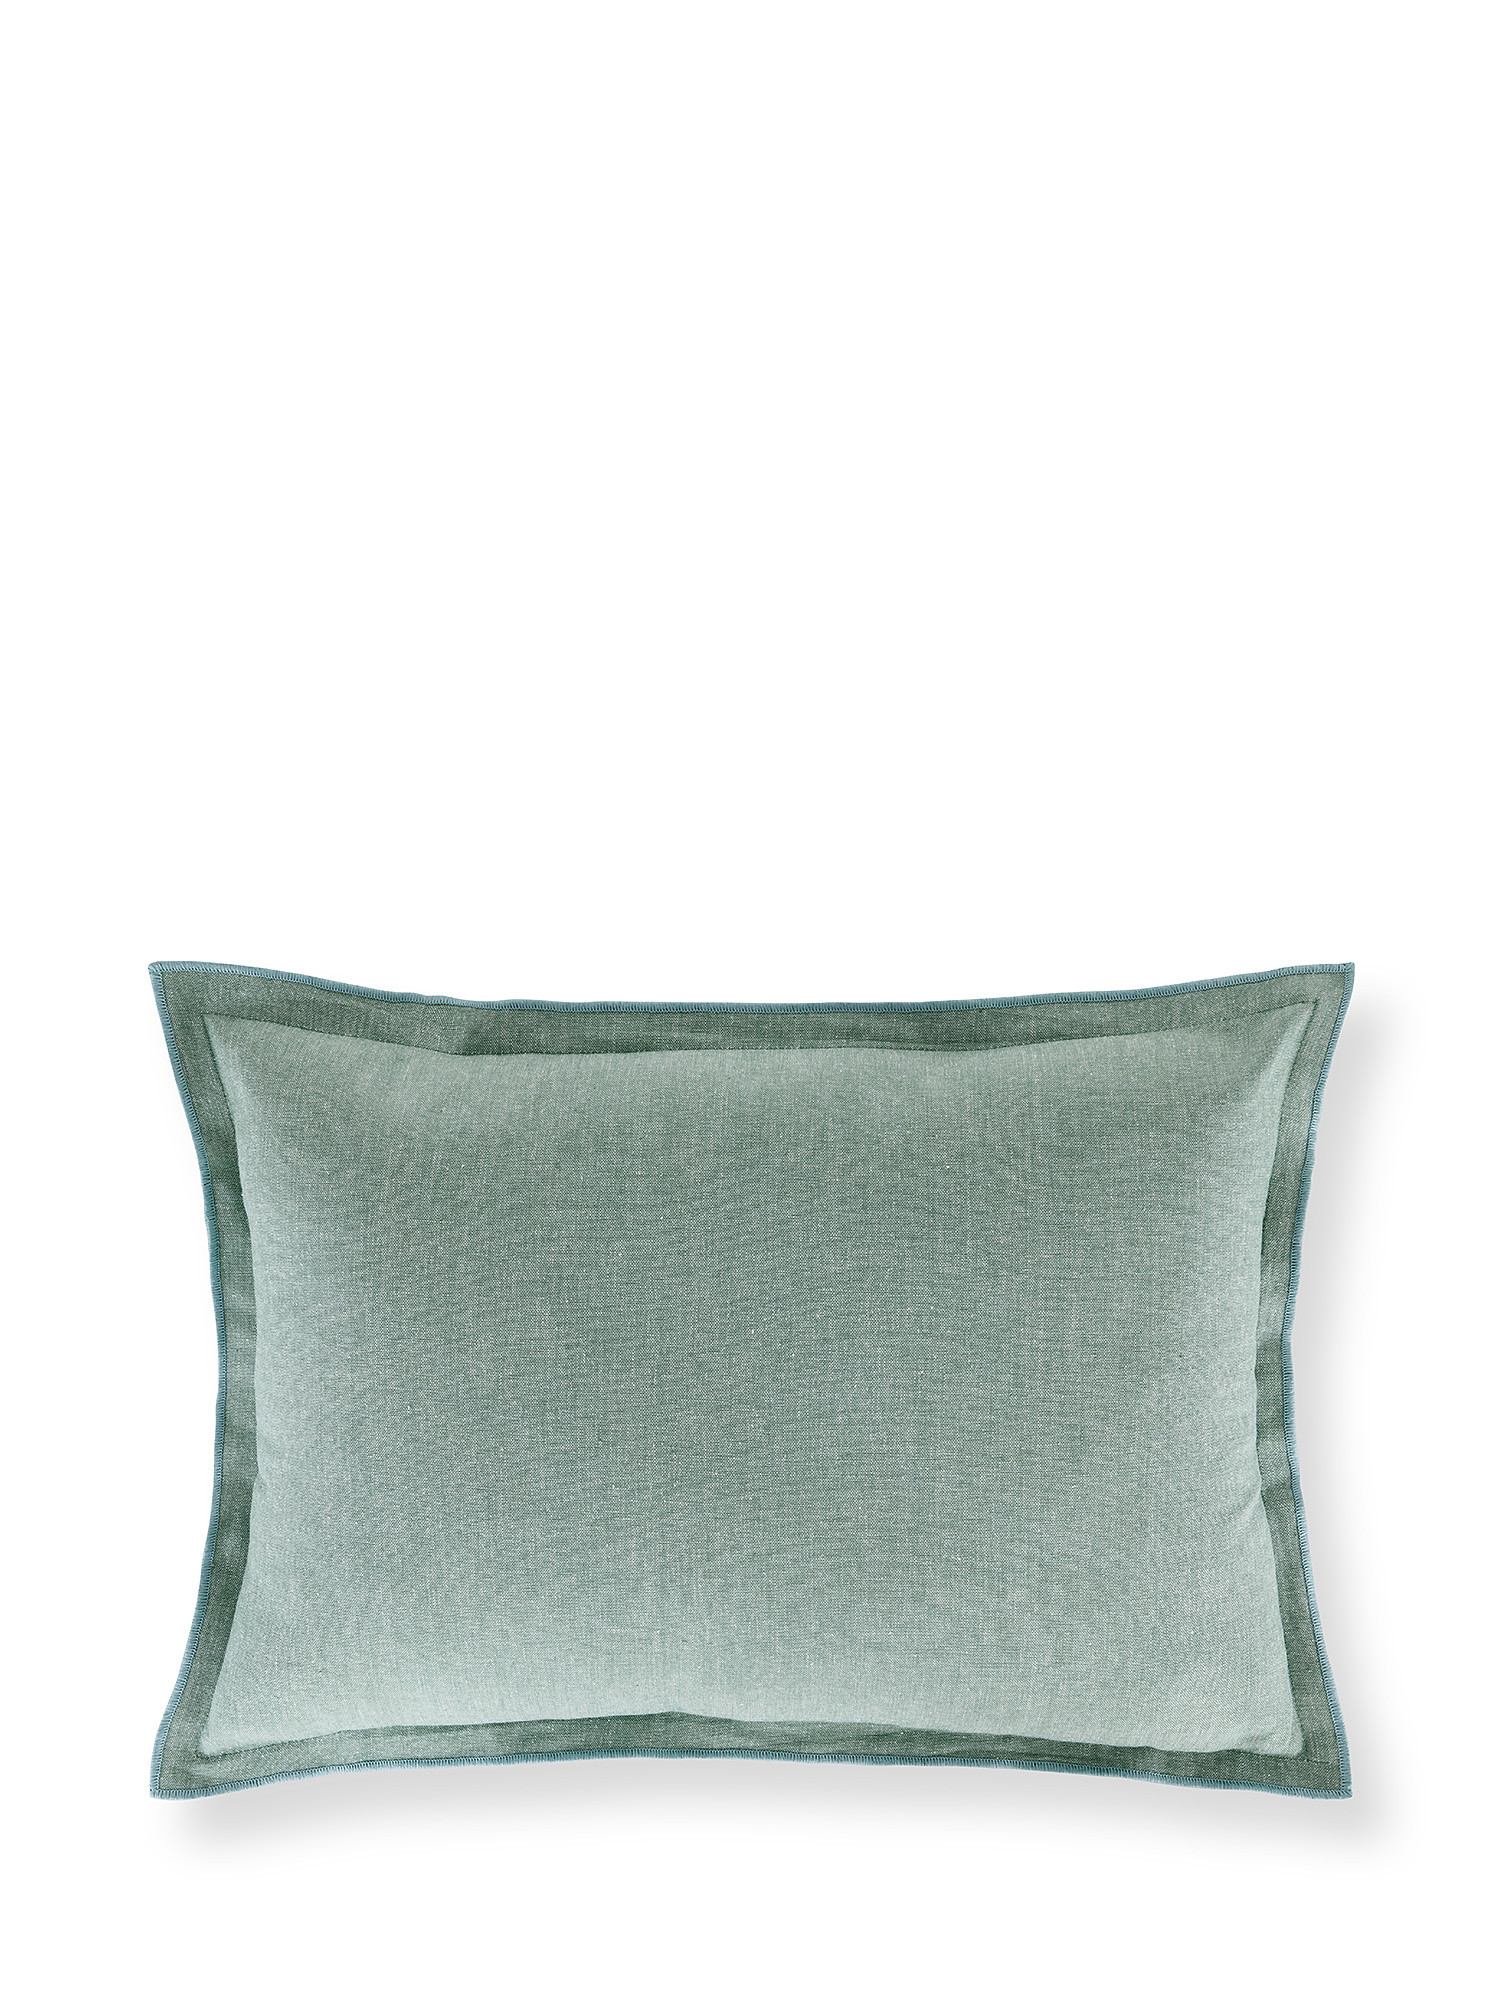 Solid color cotton cushion 45x45cm, Green, large image number 0